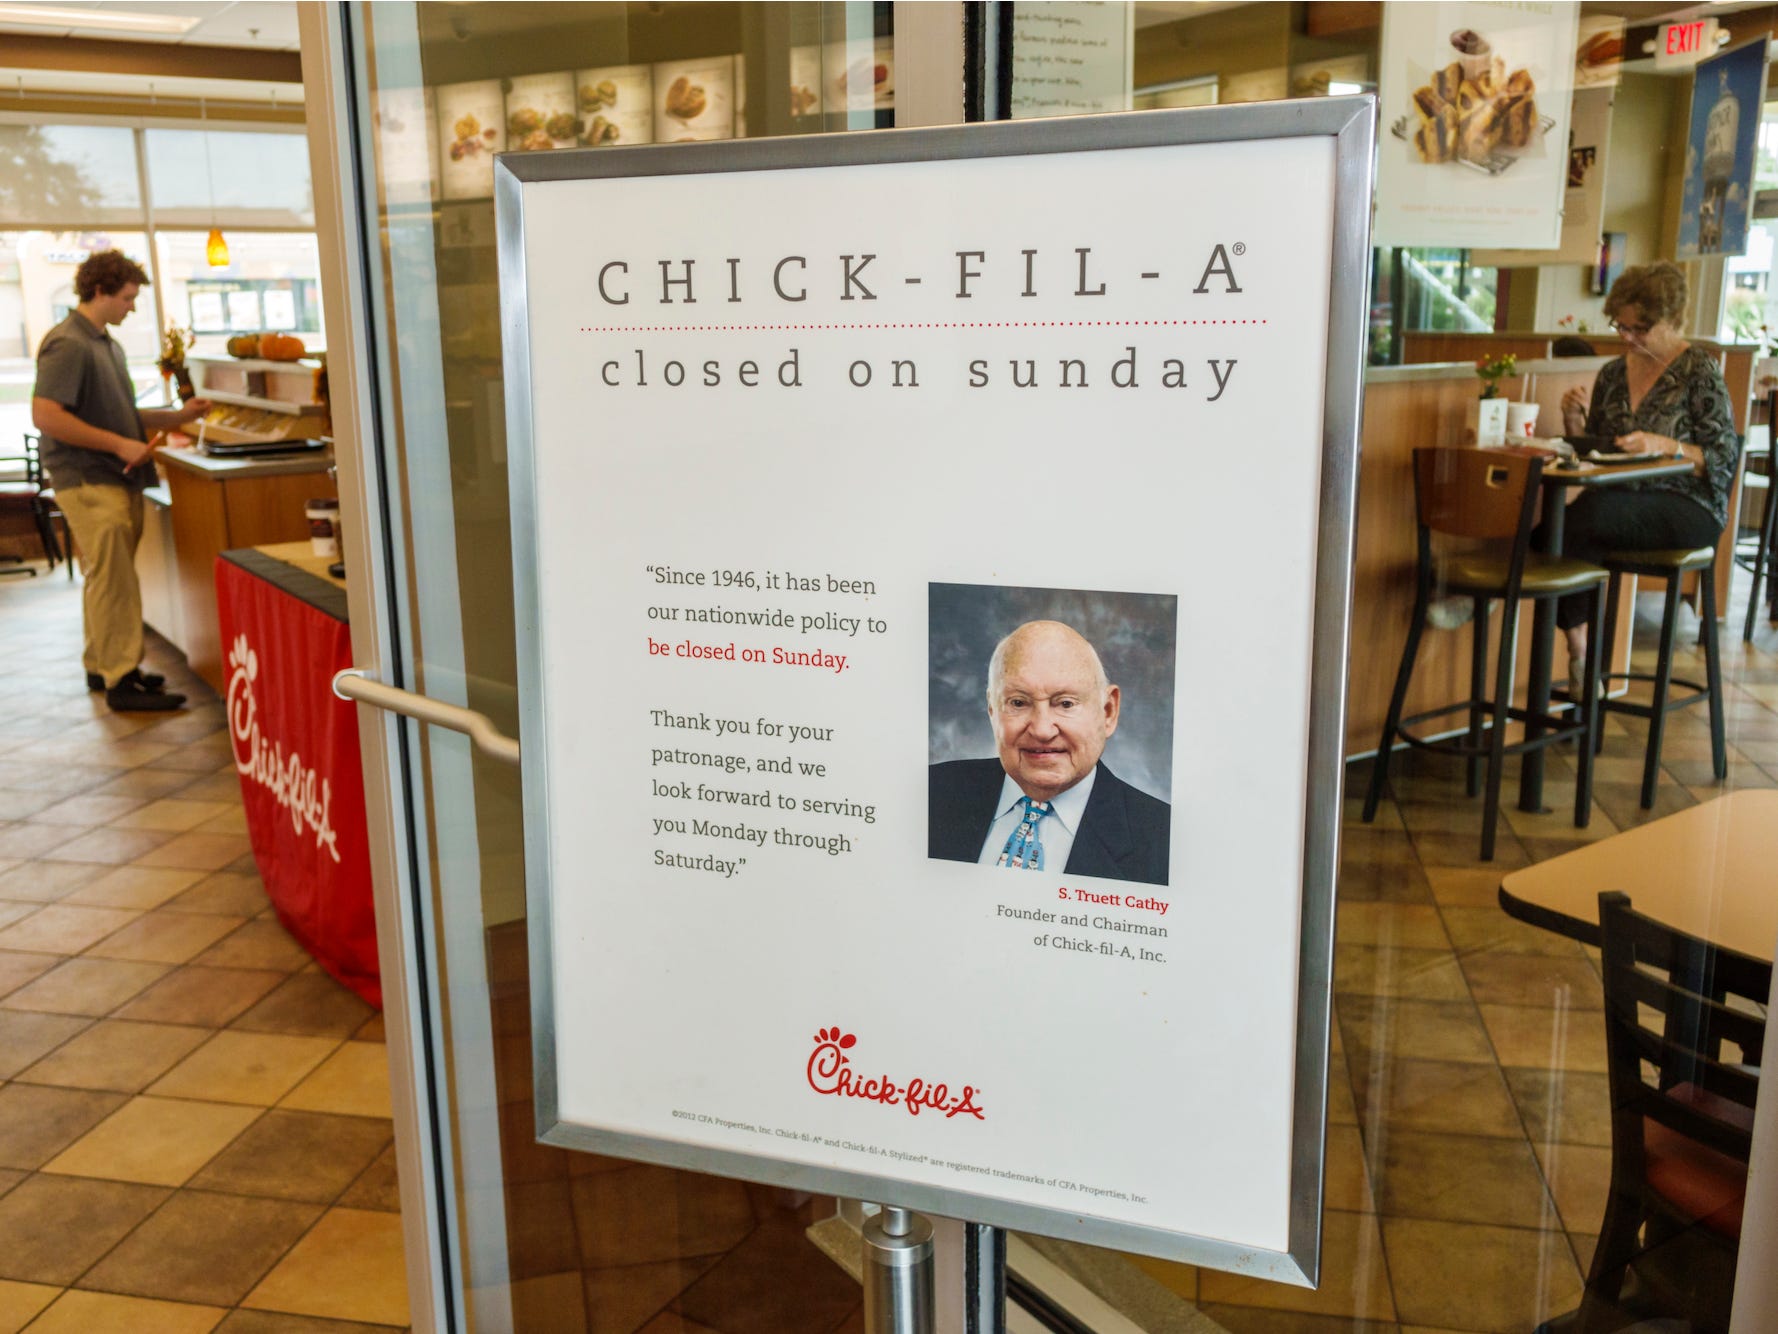 <p>Restaurant openings often include prayer, and employees are advised "to base your business in biblical principles."</p><p>"Truett Cathy always maintained he wasn't in the chicken business, but the people business," the chain said. </p><p><em><strong>Source</strong>: <a href="https://www.forbes.com/profile/cathy/#2d3dc81a2e94" rel="noopener">Forbes</a>, <a href="https://www.businessinsider.com/meet-chick-fil-a-founder-s-truett-cathy-2012-7#chick-fil-a-has-grown-into-a-massive-restaurant-empire-and-cathy-has-become-a-self-made-billionaire-2" rel="noopener">Business Insider</a>, <a href="https://www.wsj.com/articles/SB10000872396390444840104577553341868014390" rel="noopener">The Wall Street Journal</a></em></p>